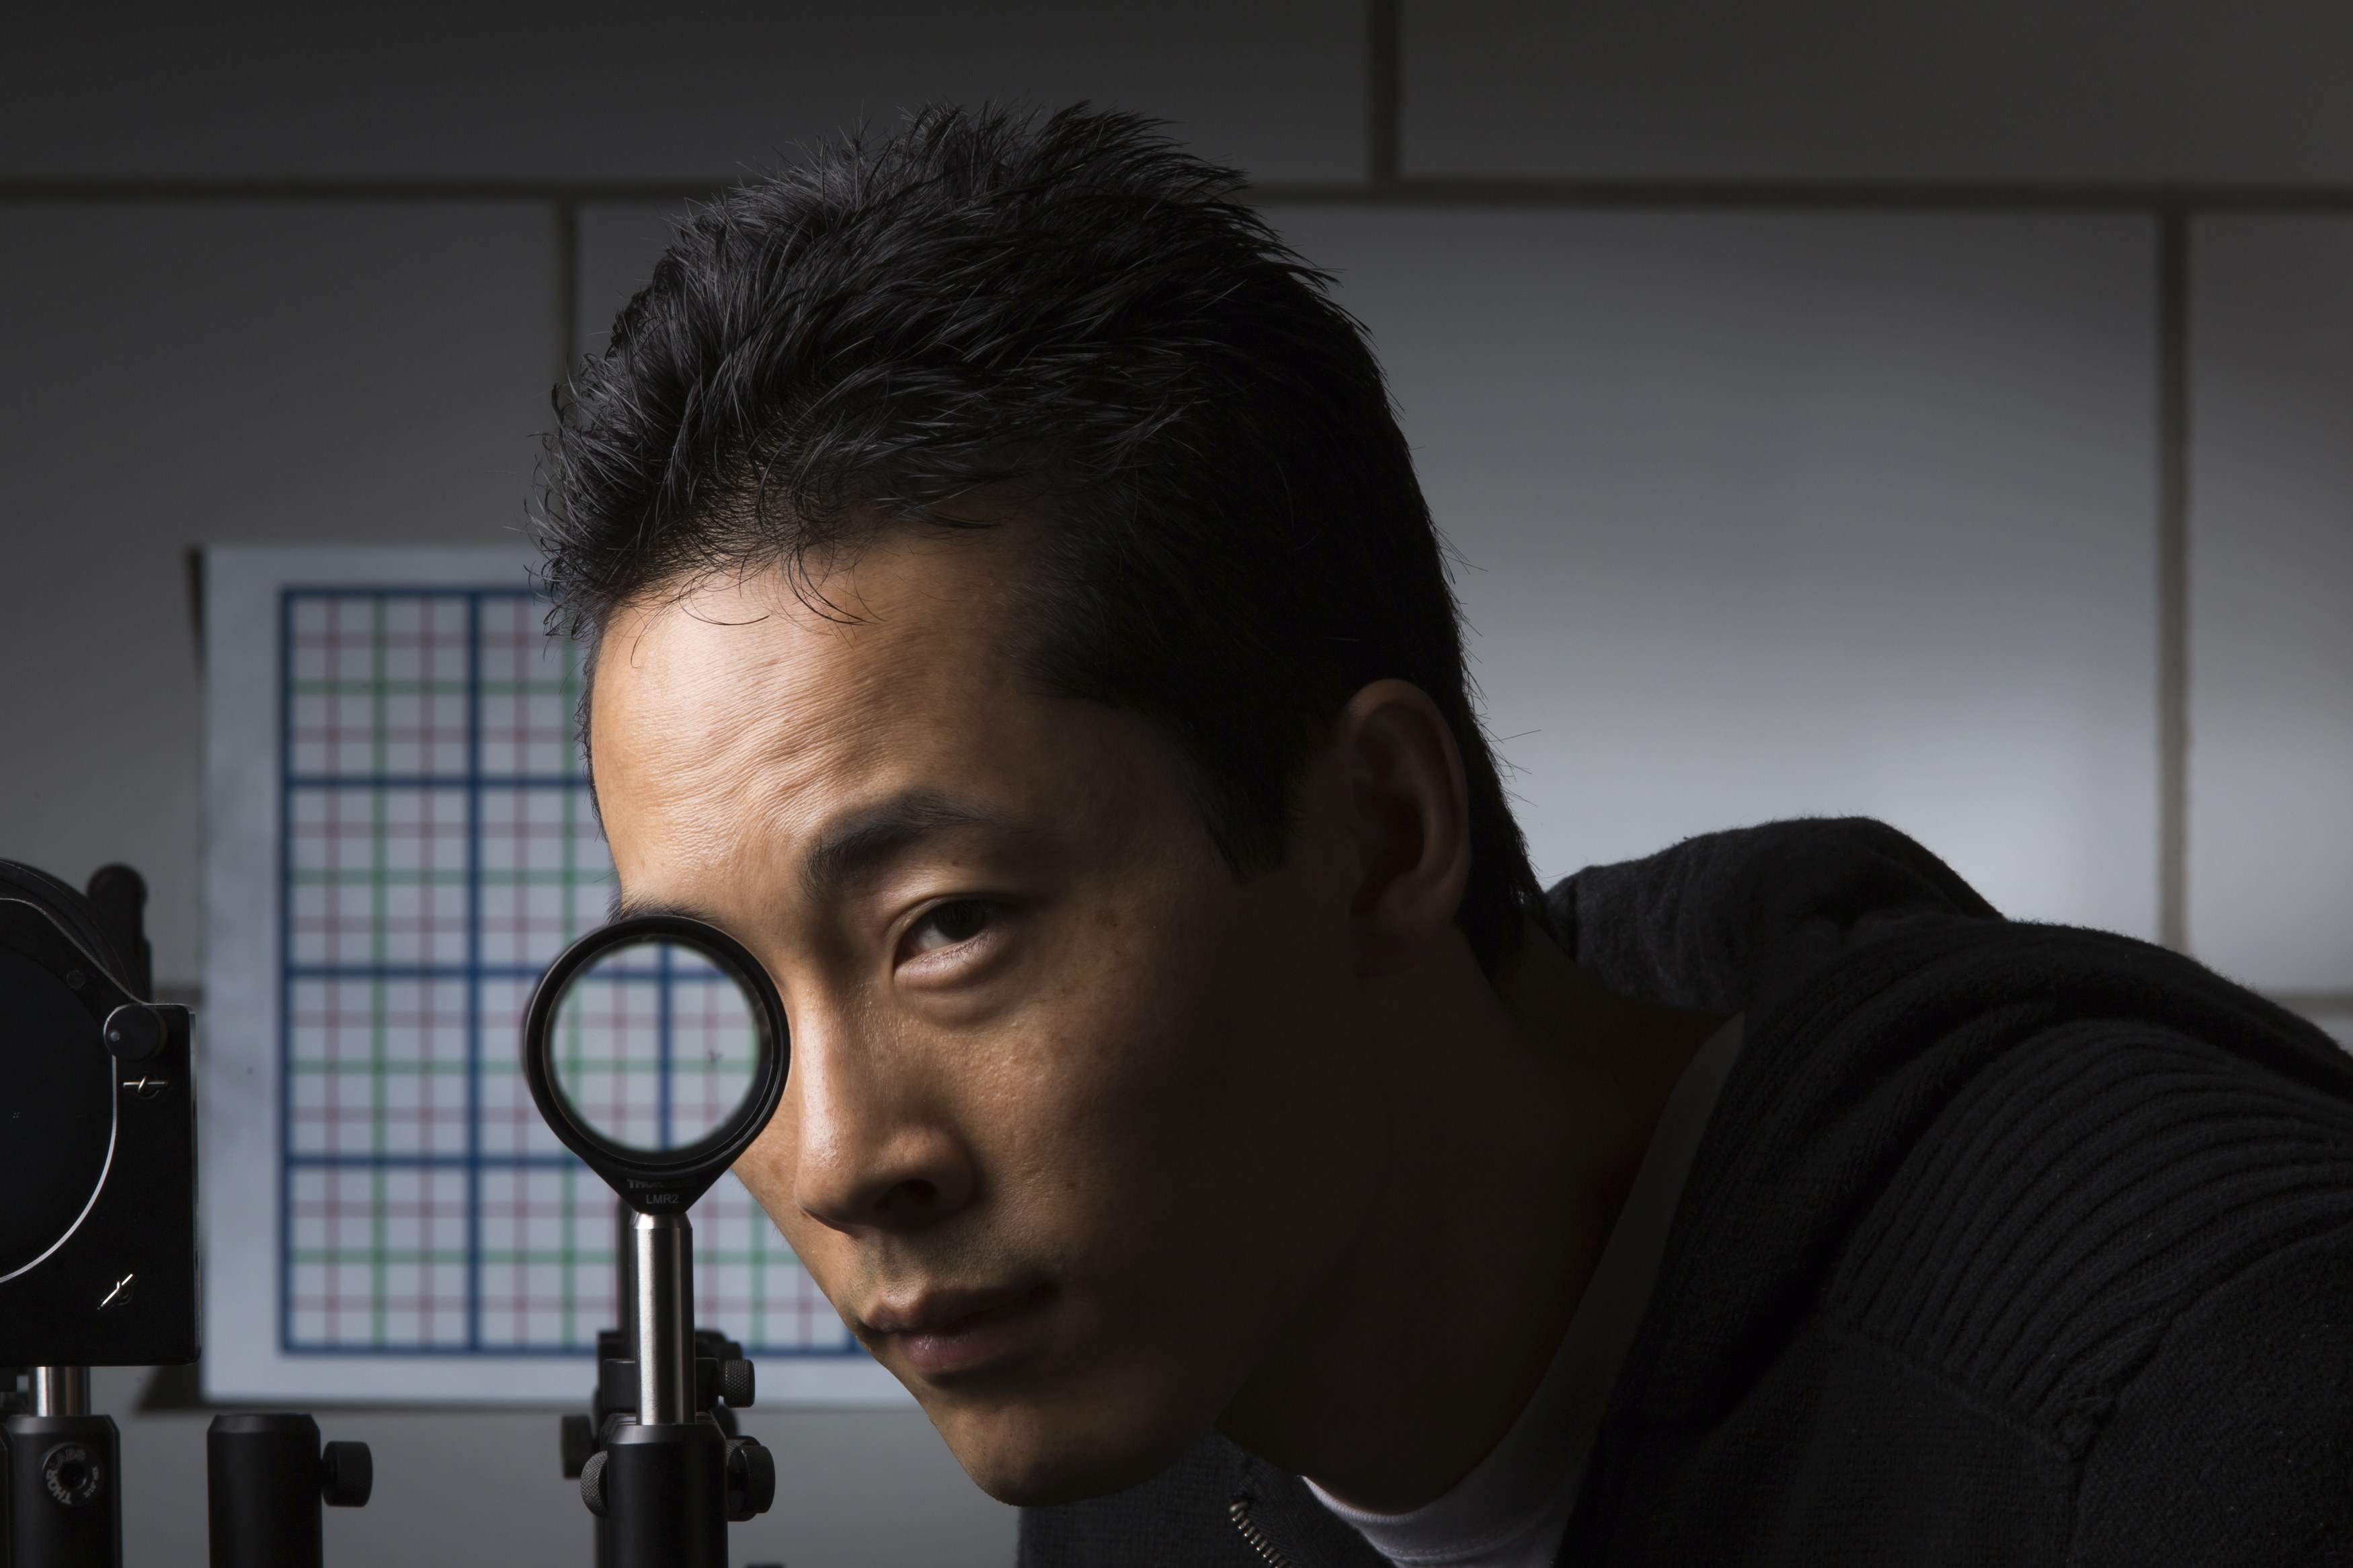 University of Rochester Ph.D. student Joseph Choi demonstrates a cloaking device using four lenses in Rochester, New York on Sept. 11. | REUTERS